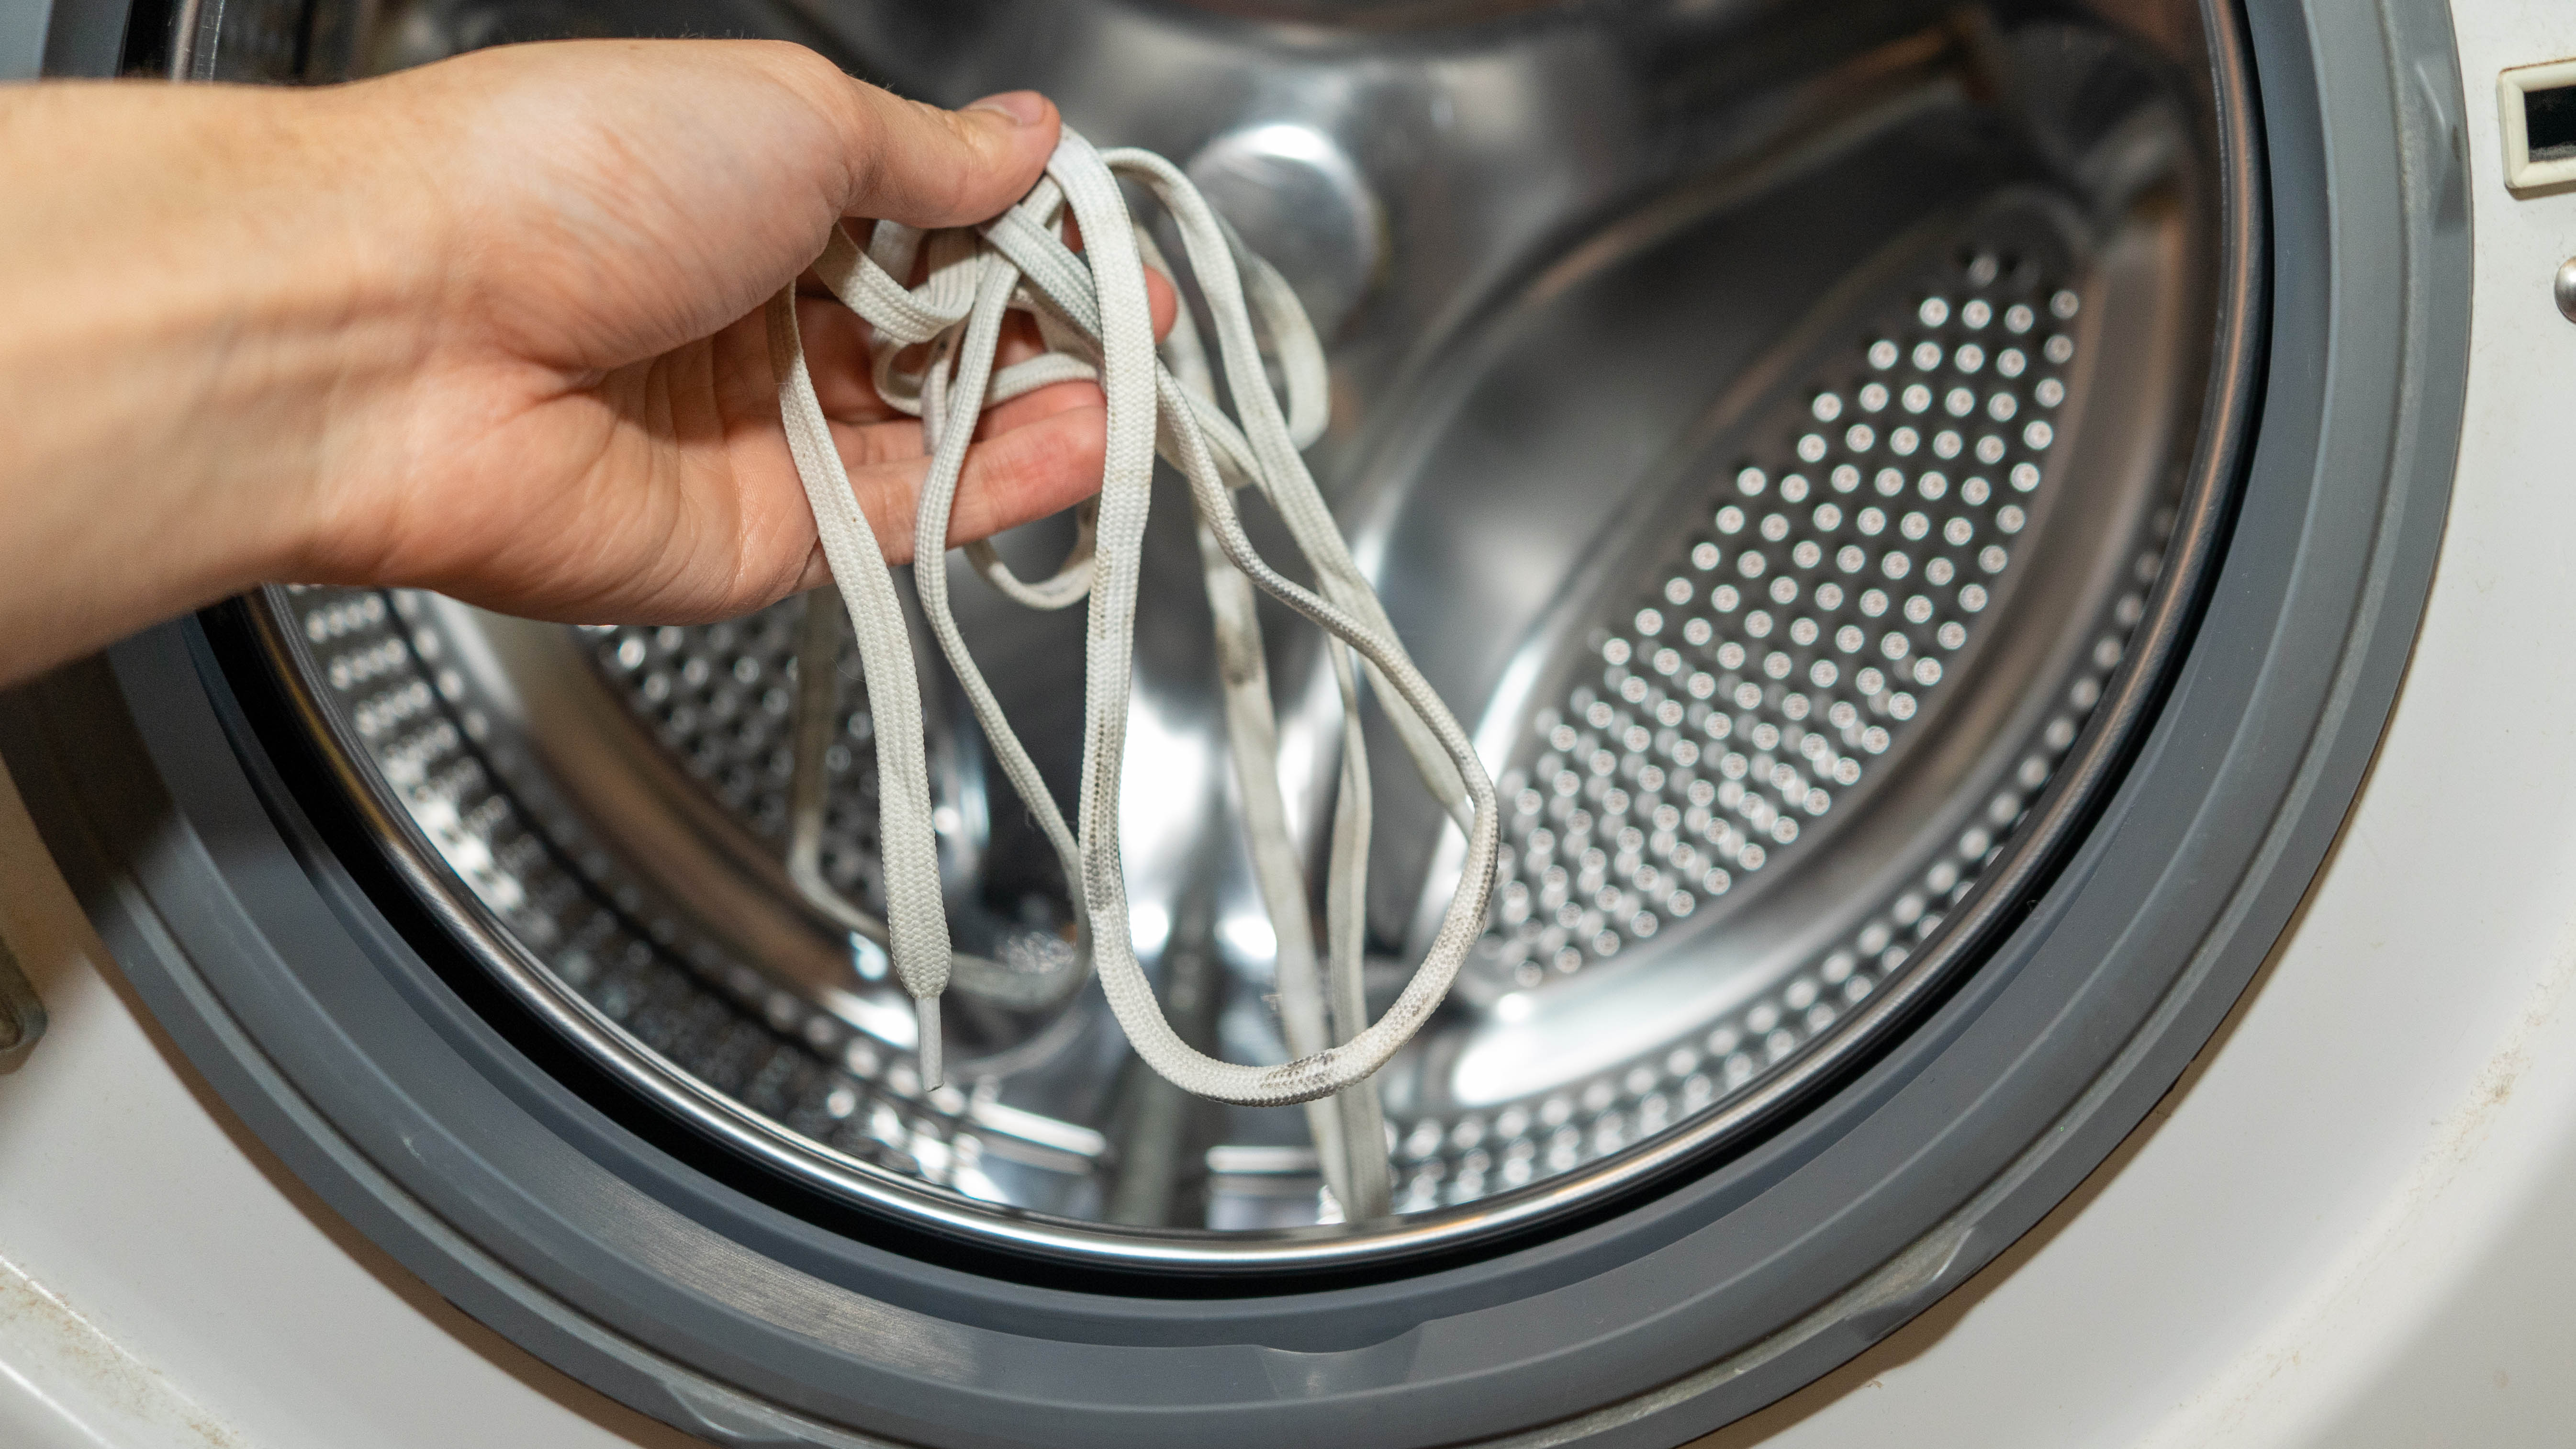 Put shoelaces in the washing machine